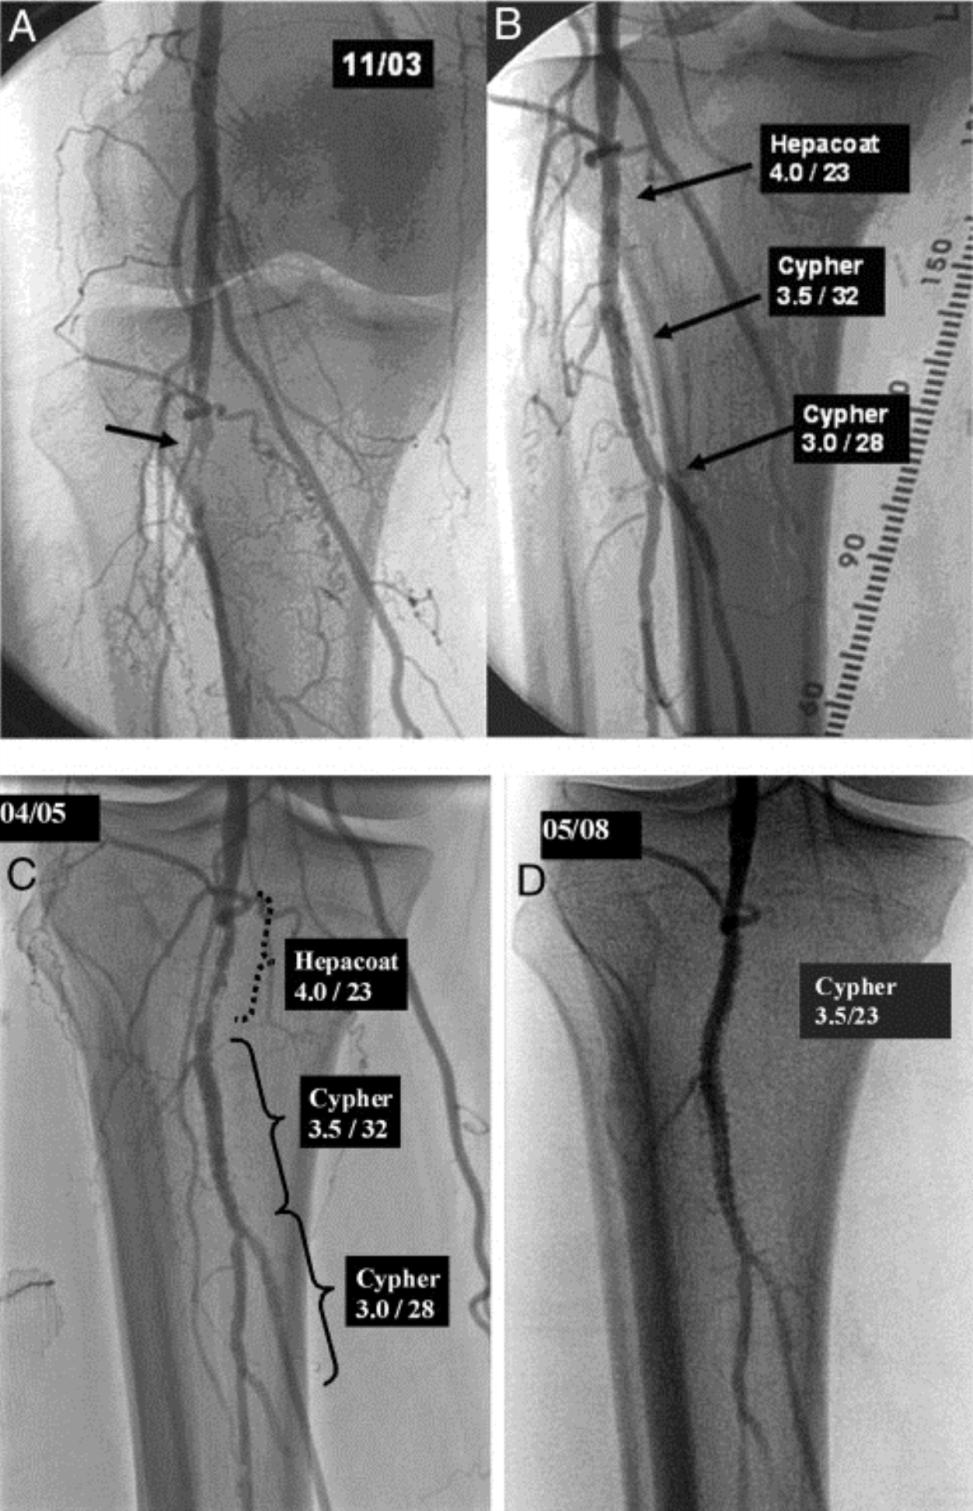 Bare-Metal In-Stent Restenosis Successfully Treated With DES (A) An 87-year-old patient, Rutherford 5 CLI. The arrow indicates popliteal artery occlusion. (B) After placing a proximal 4.